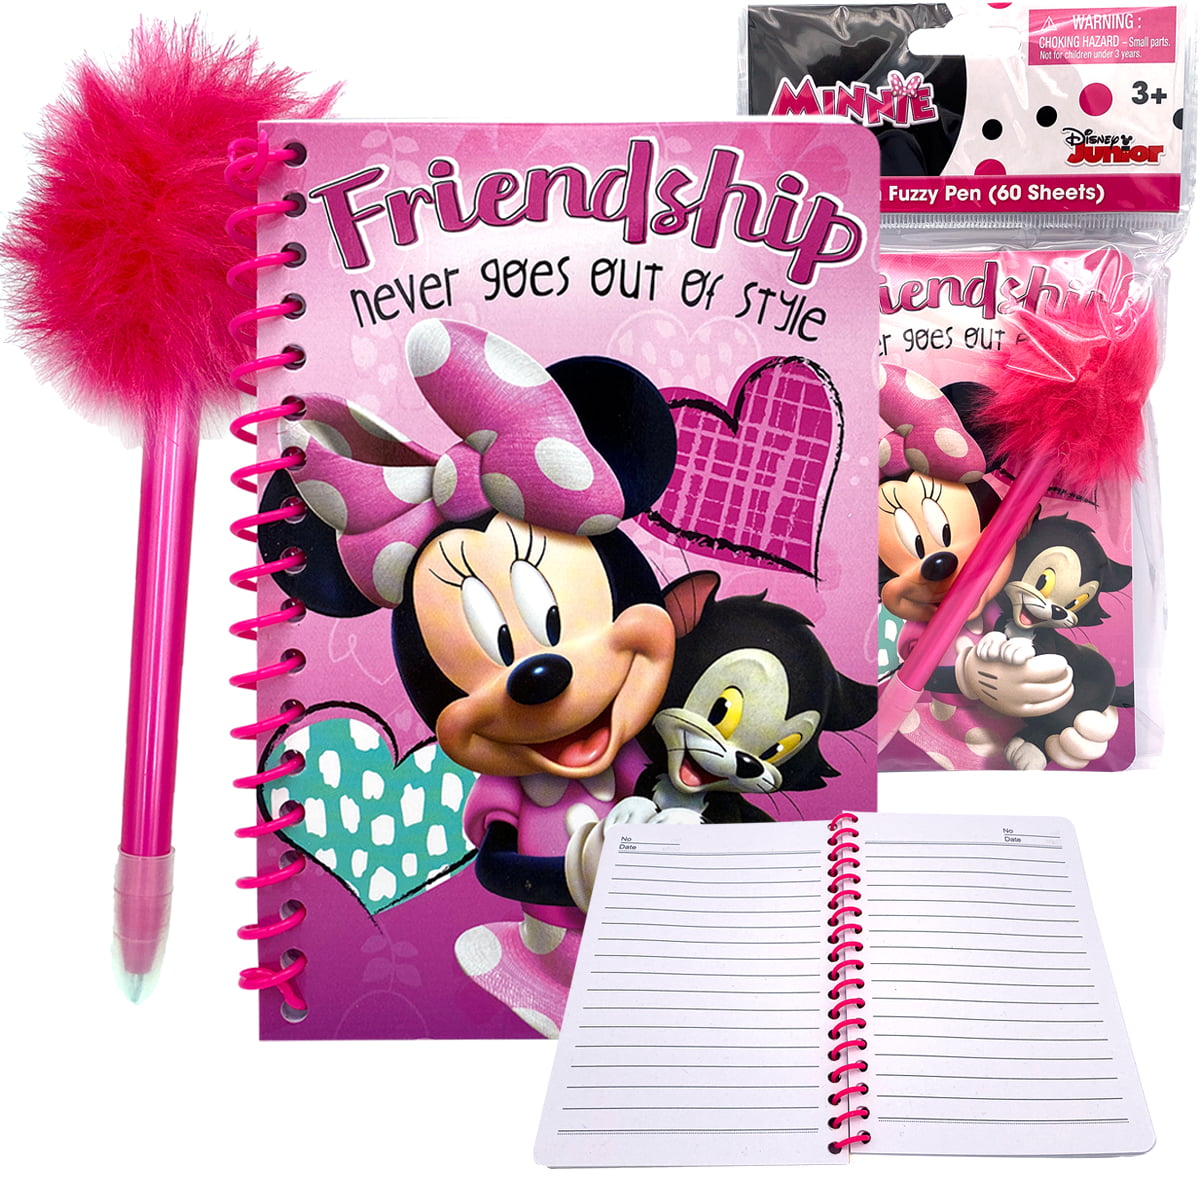 1 DISNEY 40 Page Die Cut Spiral Notebook With Pen Set Assorted Disney Theme Girl 